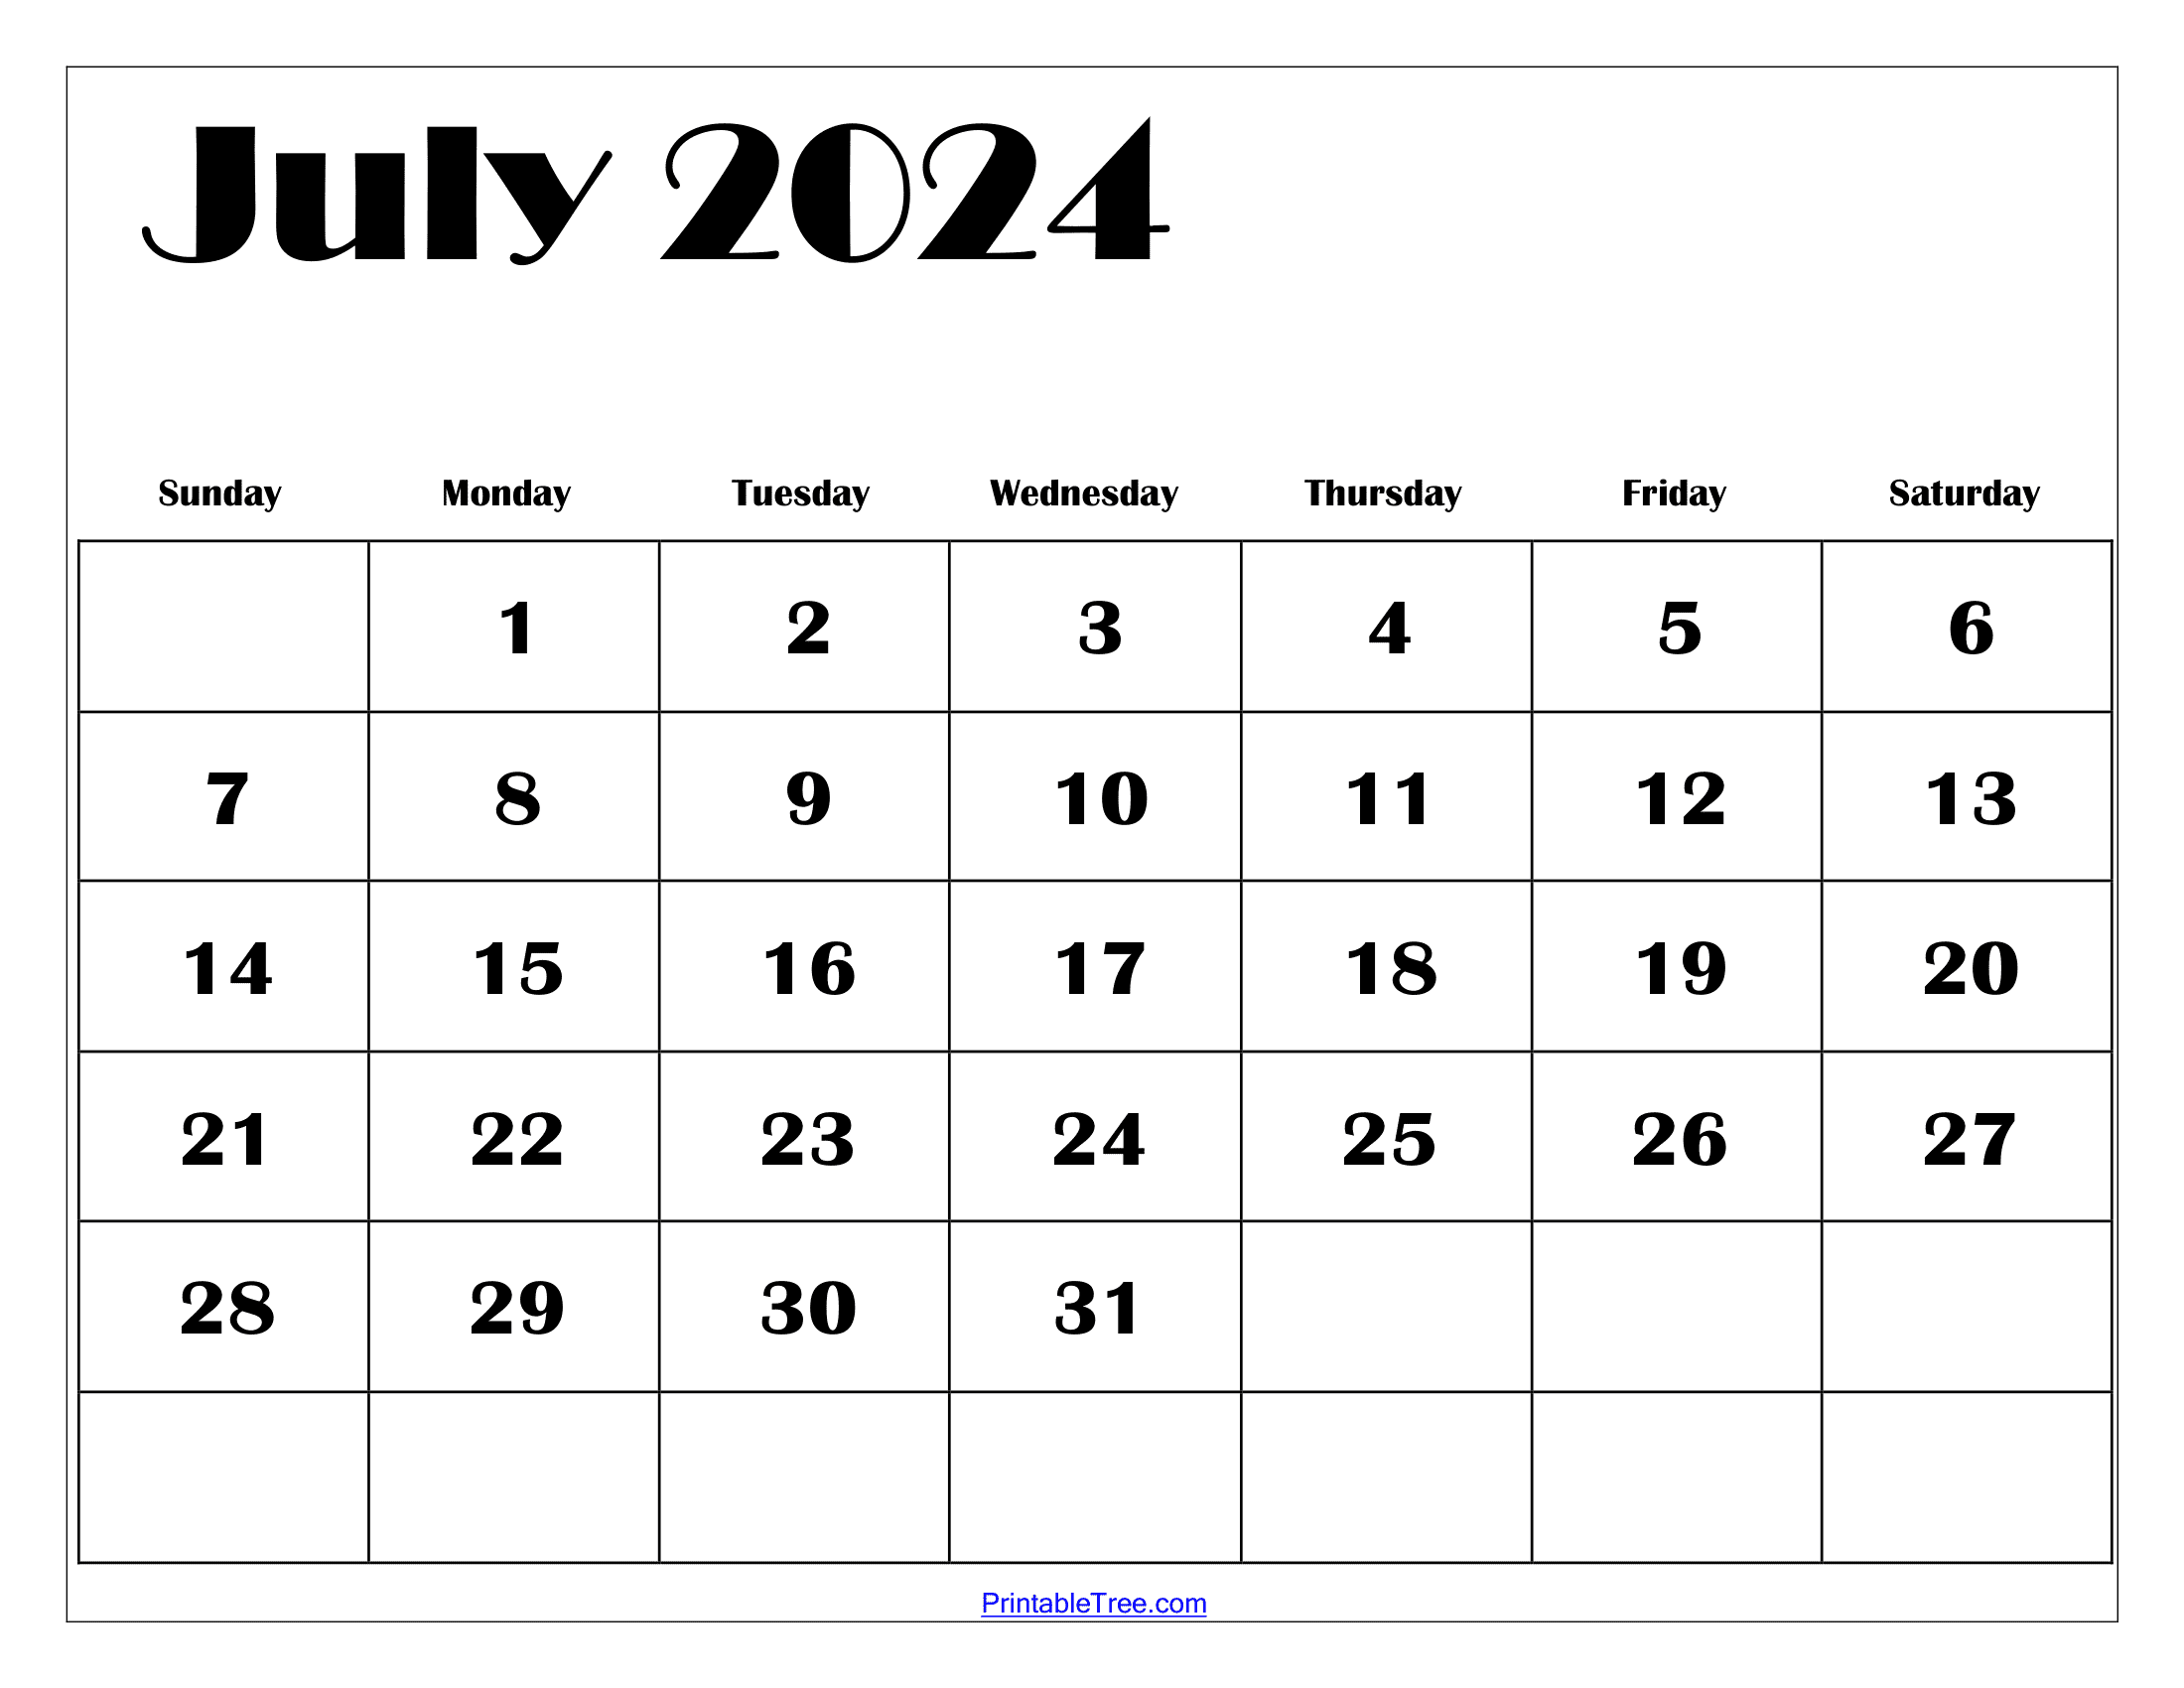 July 2024 Calendar Printable Pdf With Holidays Free Template for Printable Calendar June July 2024